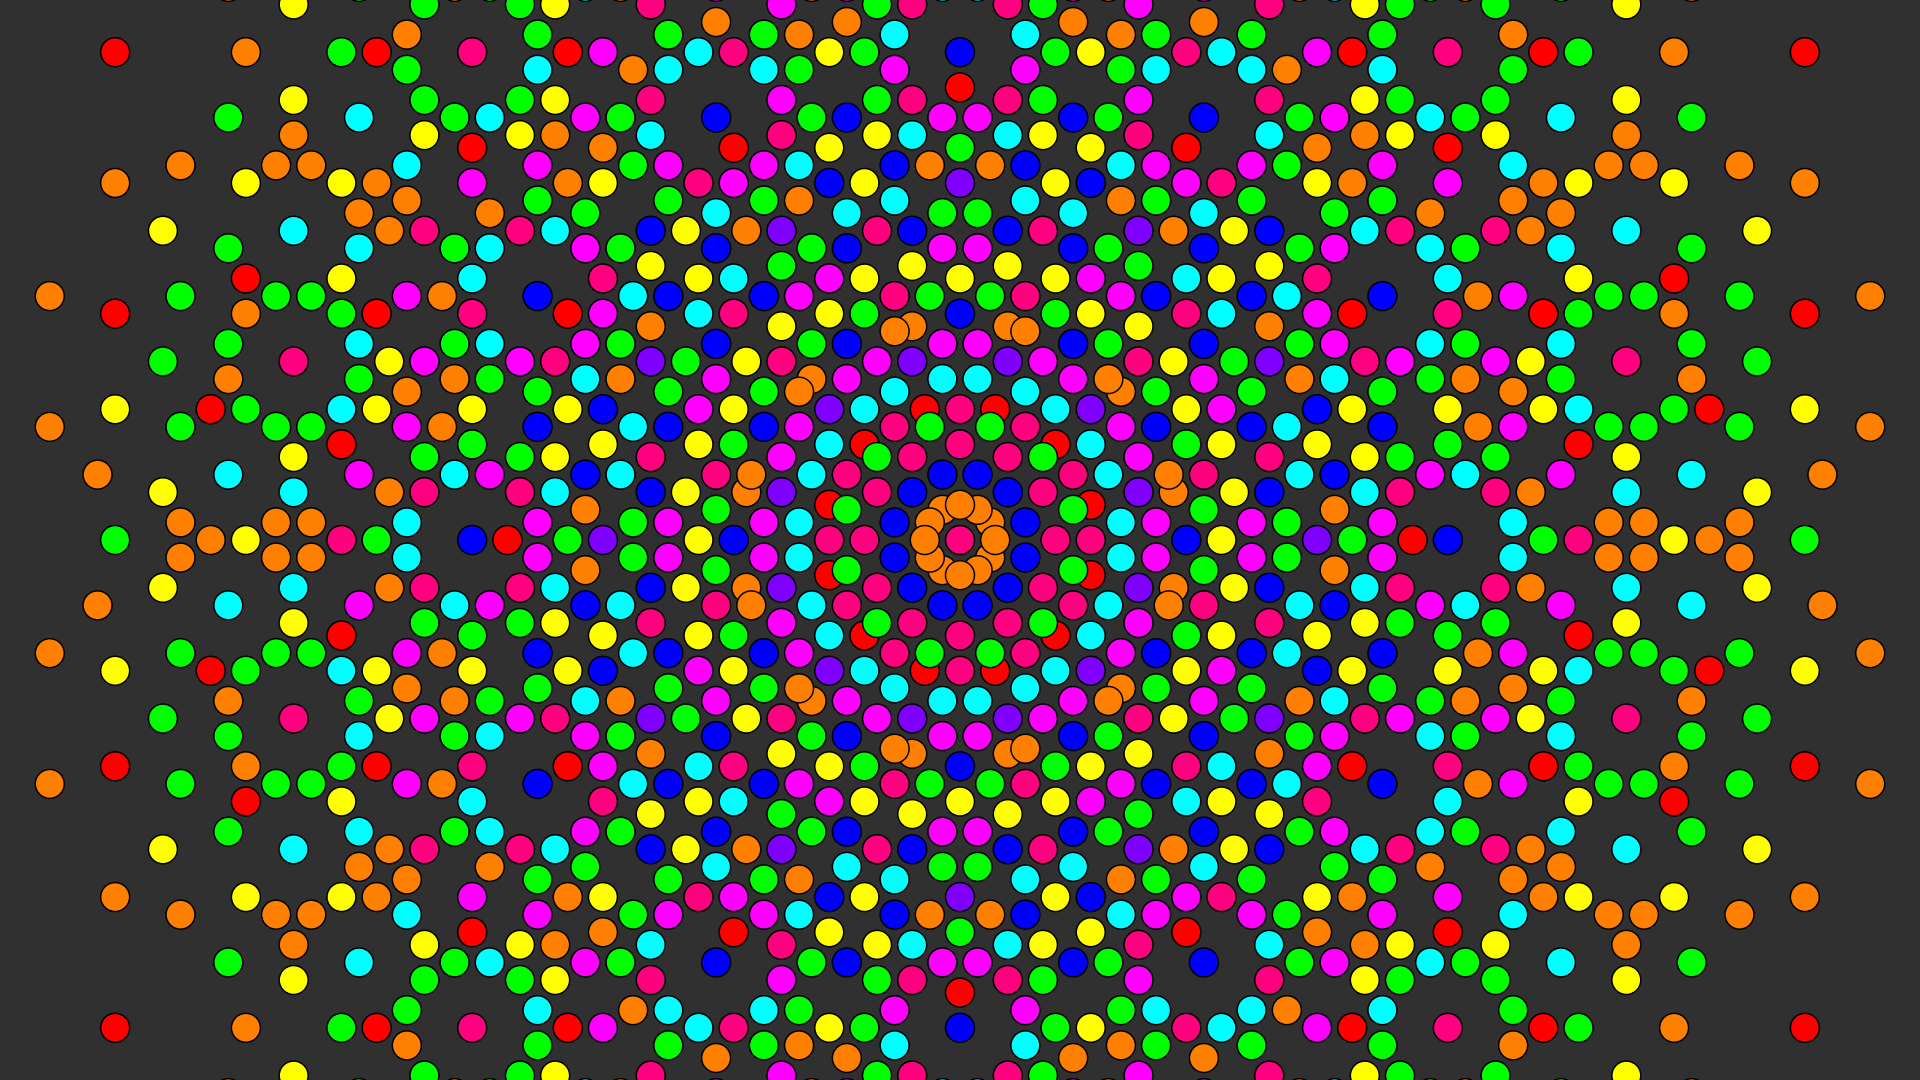 psychedelic, Colorful, Circle, Artwork, Abstract, Symmetry